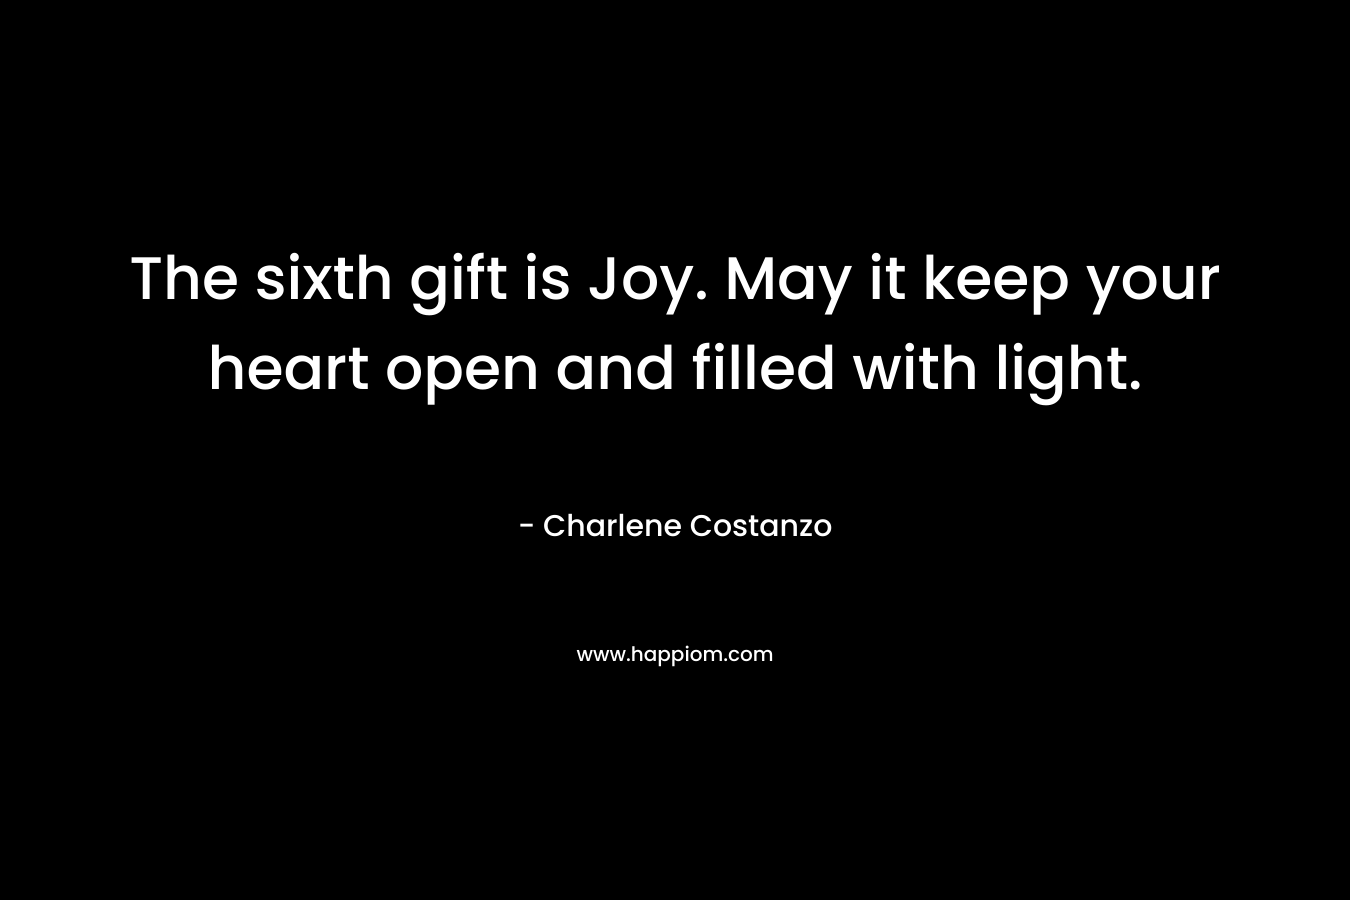 The sixth gift is Joy. May it keep your heart open and filled with light.